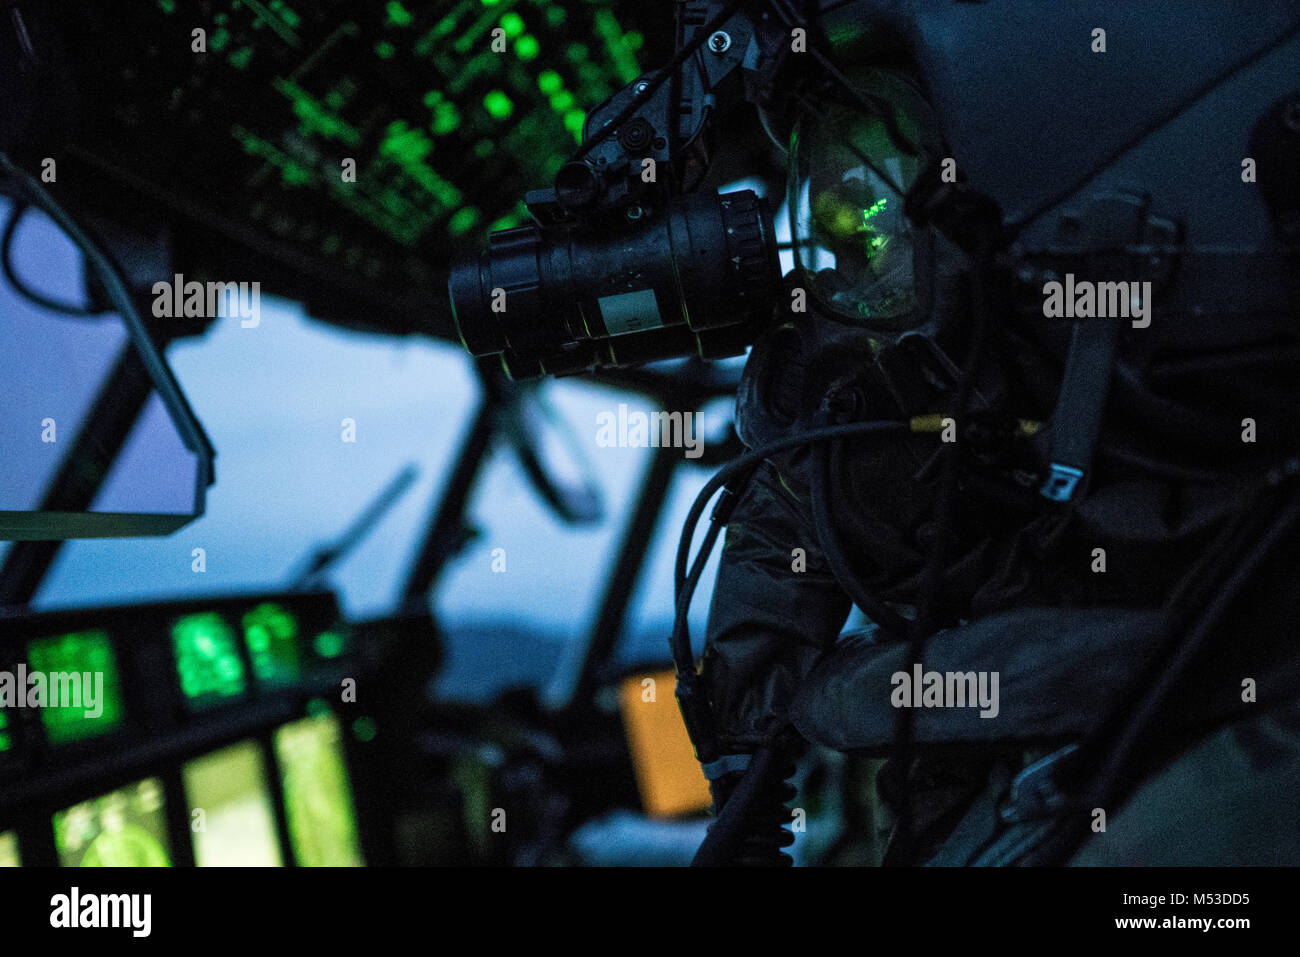 A U.S. Air Force 17th Special Operations Squadron pilot executes in-flight training with aircrew eye and respiratory protection system (AERPS) equipment Jan. 31, 2018, off the coast of Okinawa, Japan. Aircrew took turns donning equipment in-flight, while the remainder of the crew monitored them as a safety precaution. (U.S. Air Force photo by Capt. Jessica Tait) Stock Photo